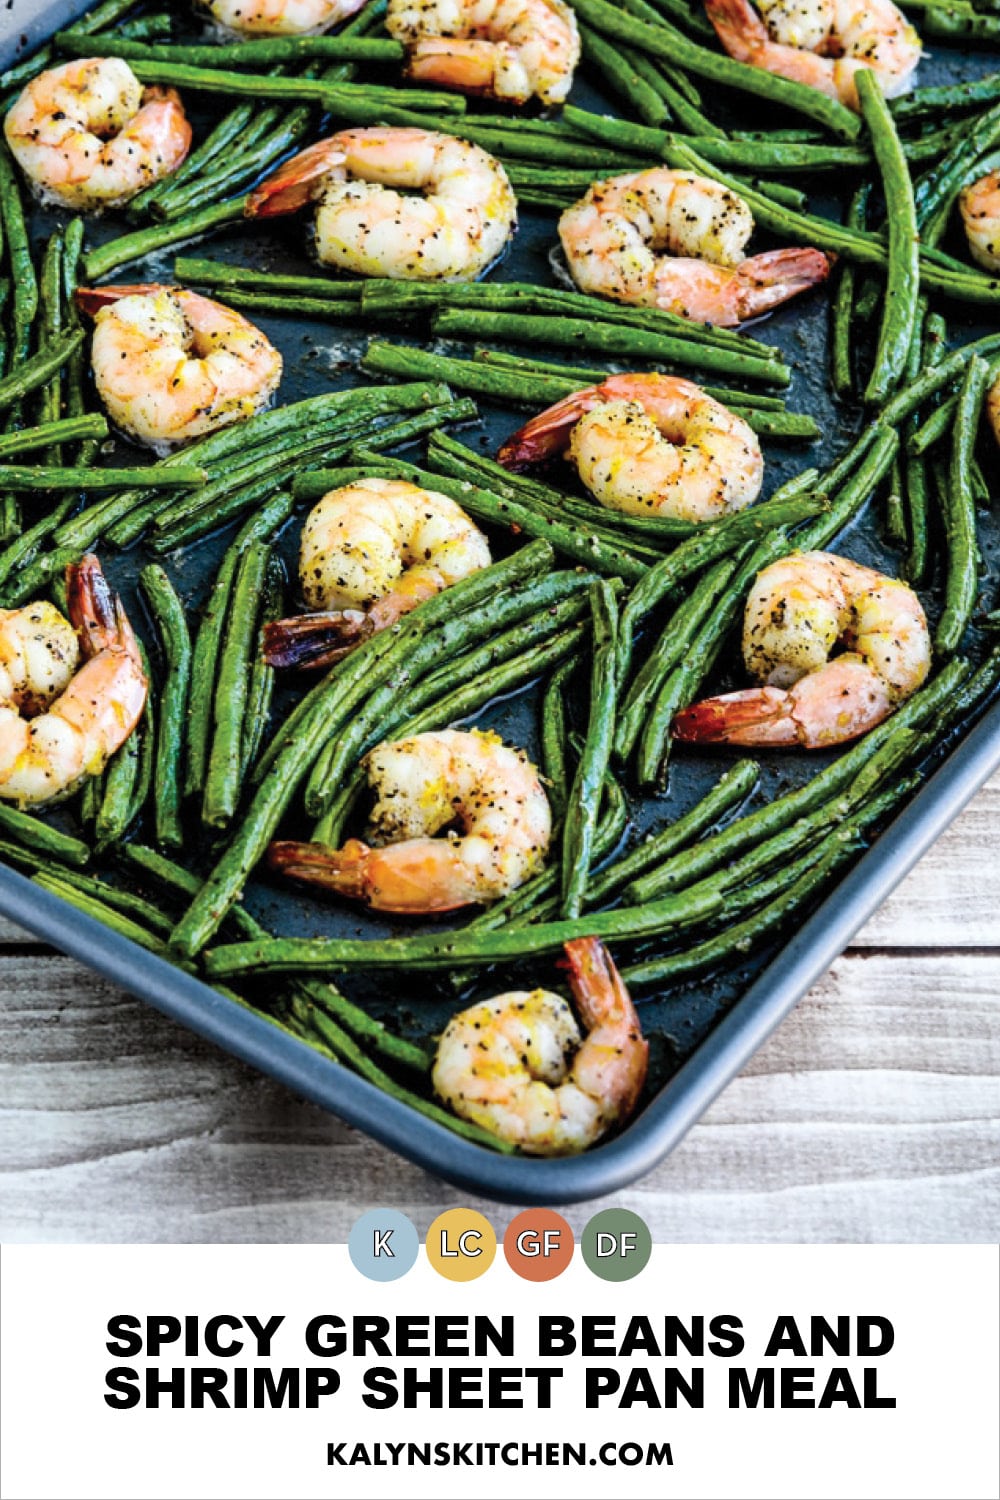 Pinterest image of Spicy Green Beans and Shrimp Sheet Pan Meal